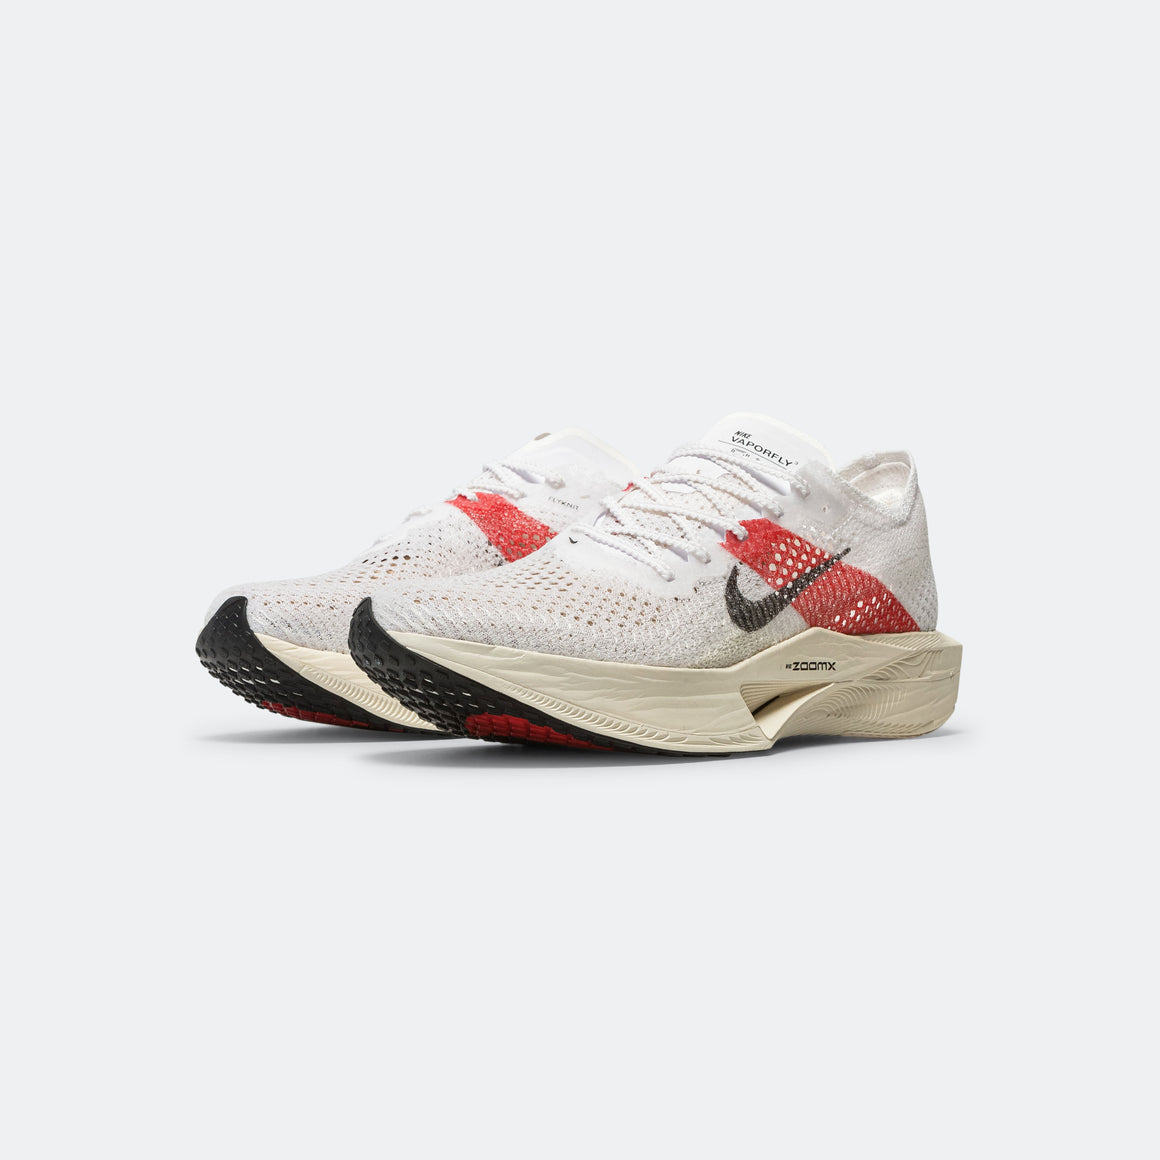 Nike - Mens ZoomX Vaporfly Next% 3 'Eliud Kipchoge' - White/Black-Chilli Red-Coconut Milk - Up There Athletics